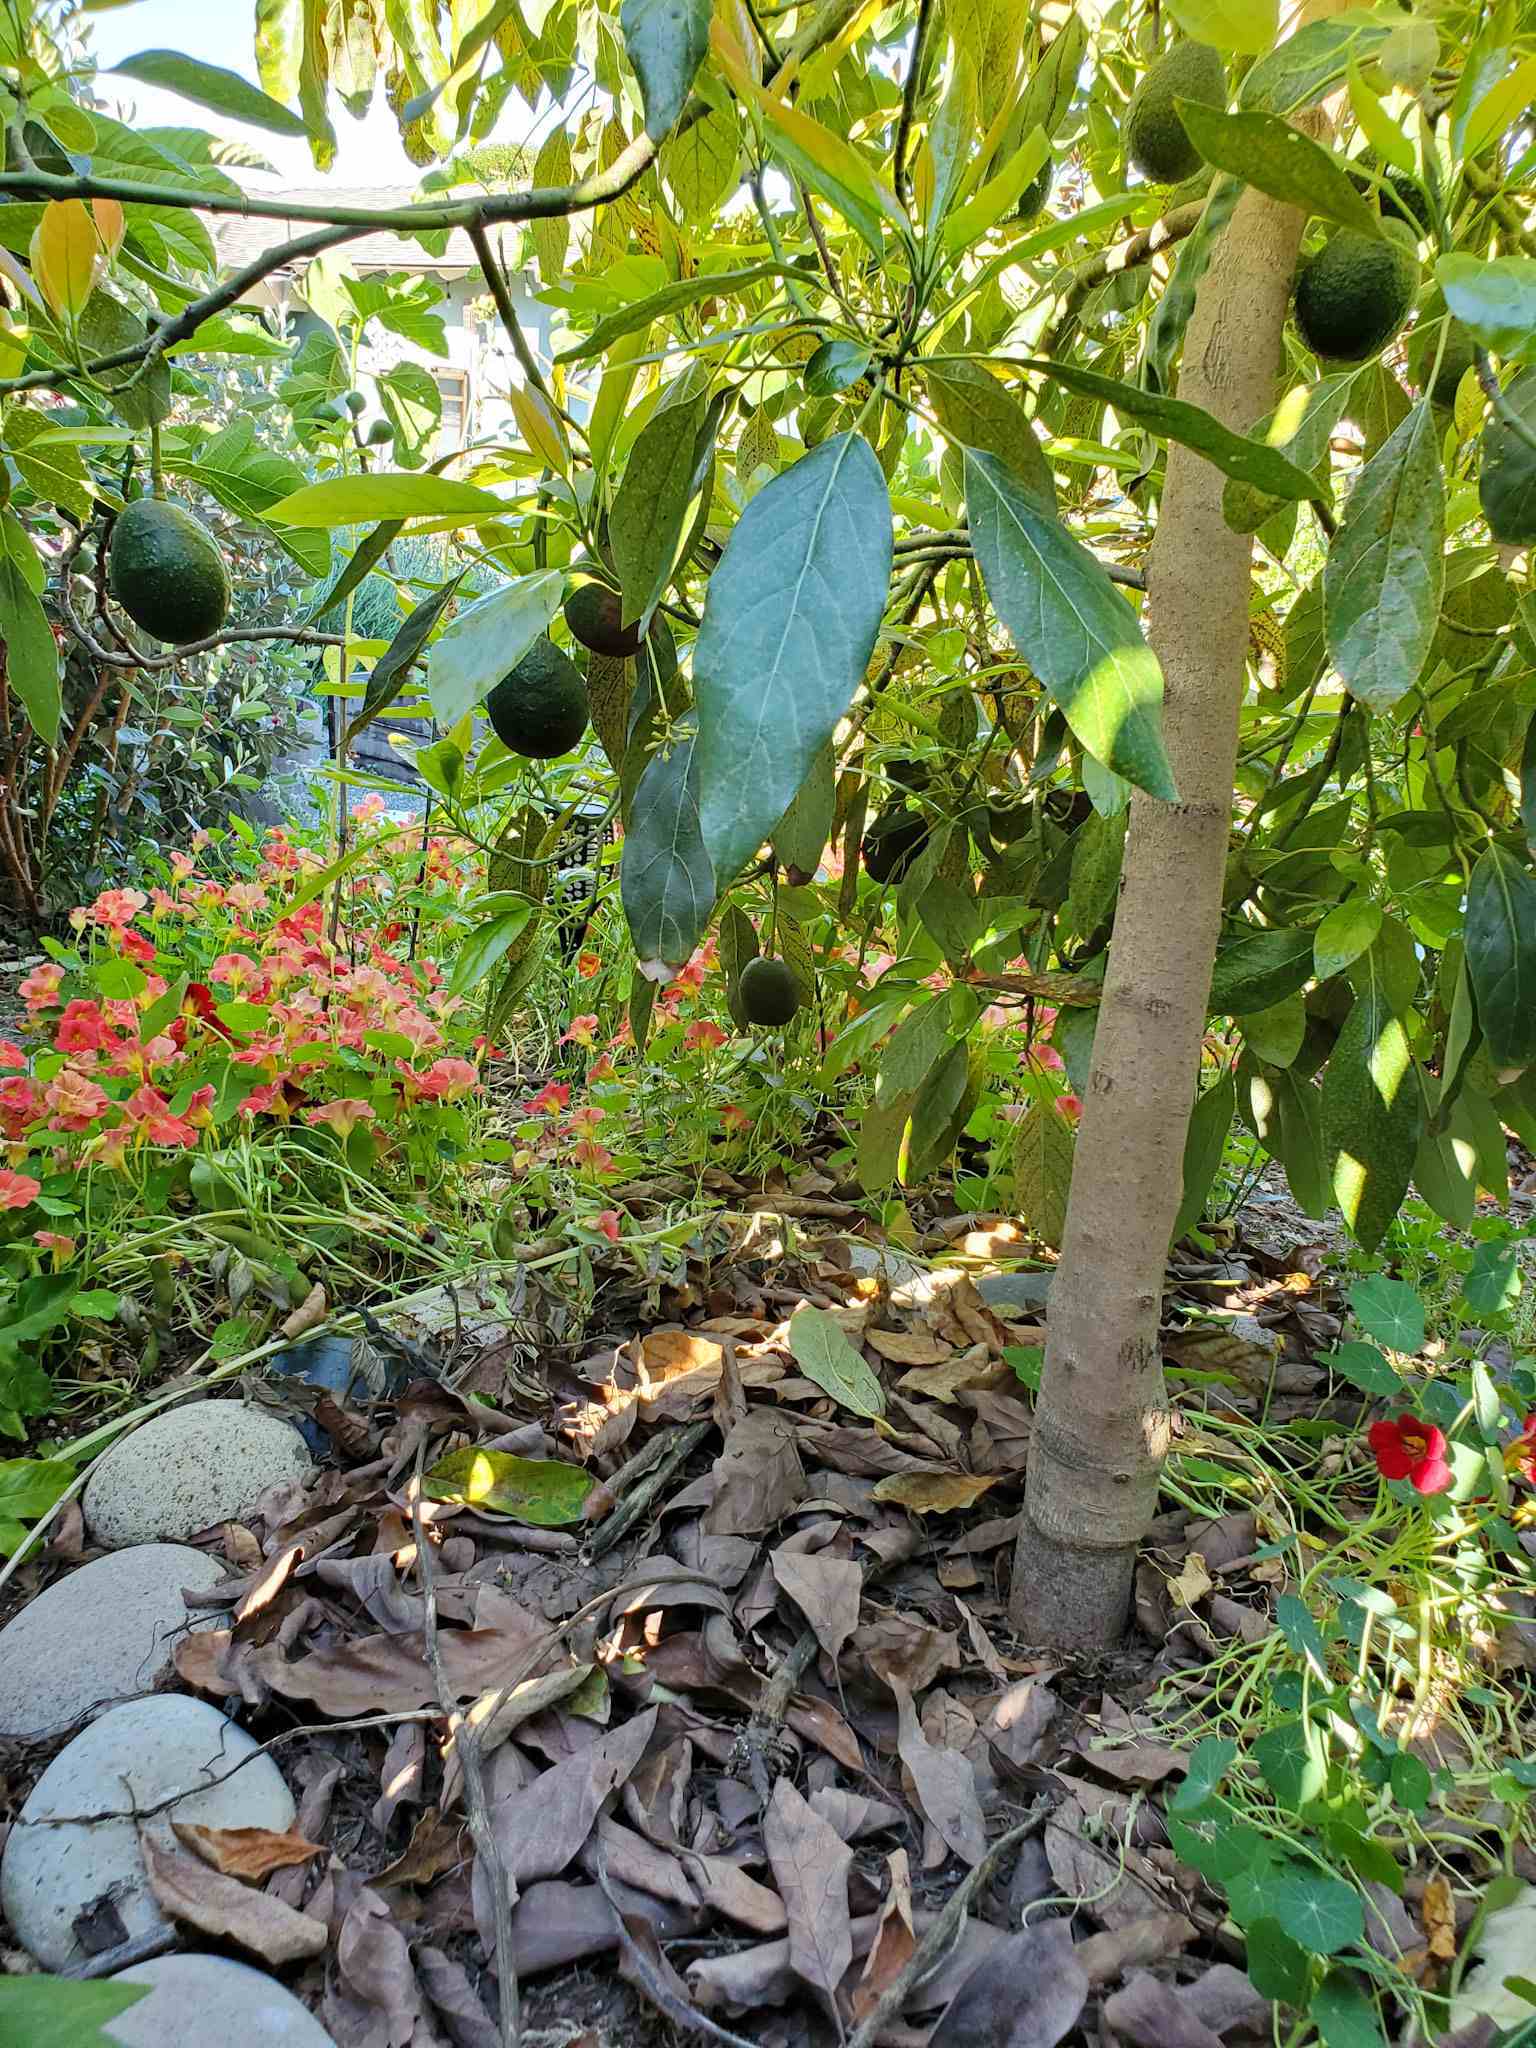 The understory of a large avocado tree is shown. There are avocados hanging from limbs and the tree mulches itself with the frequent dropping of leaves. There are nasturtiums growing around the perimeter of the tree. 